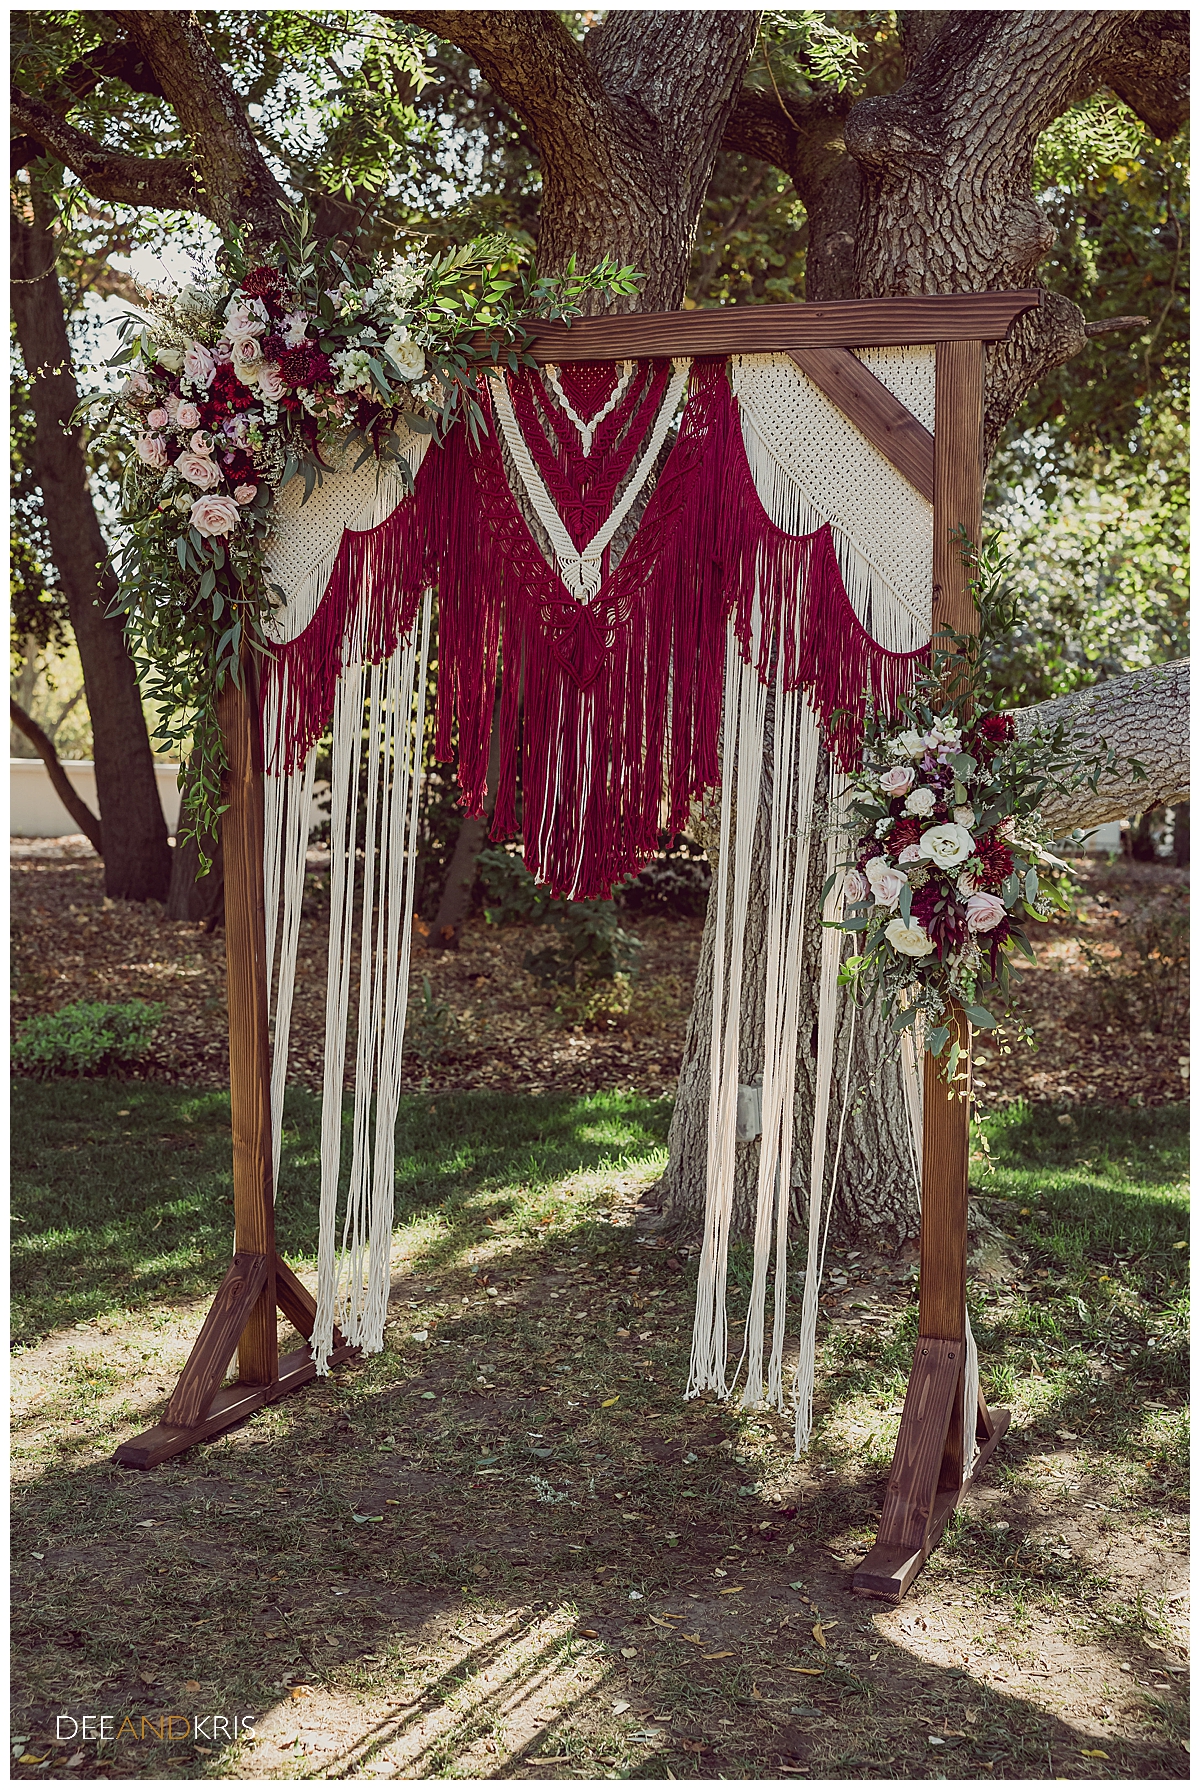 One image of the wooden archway draped in the crocheted fringe made by the bride.